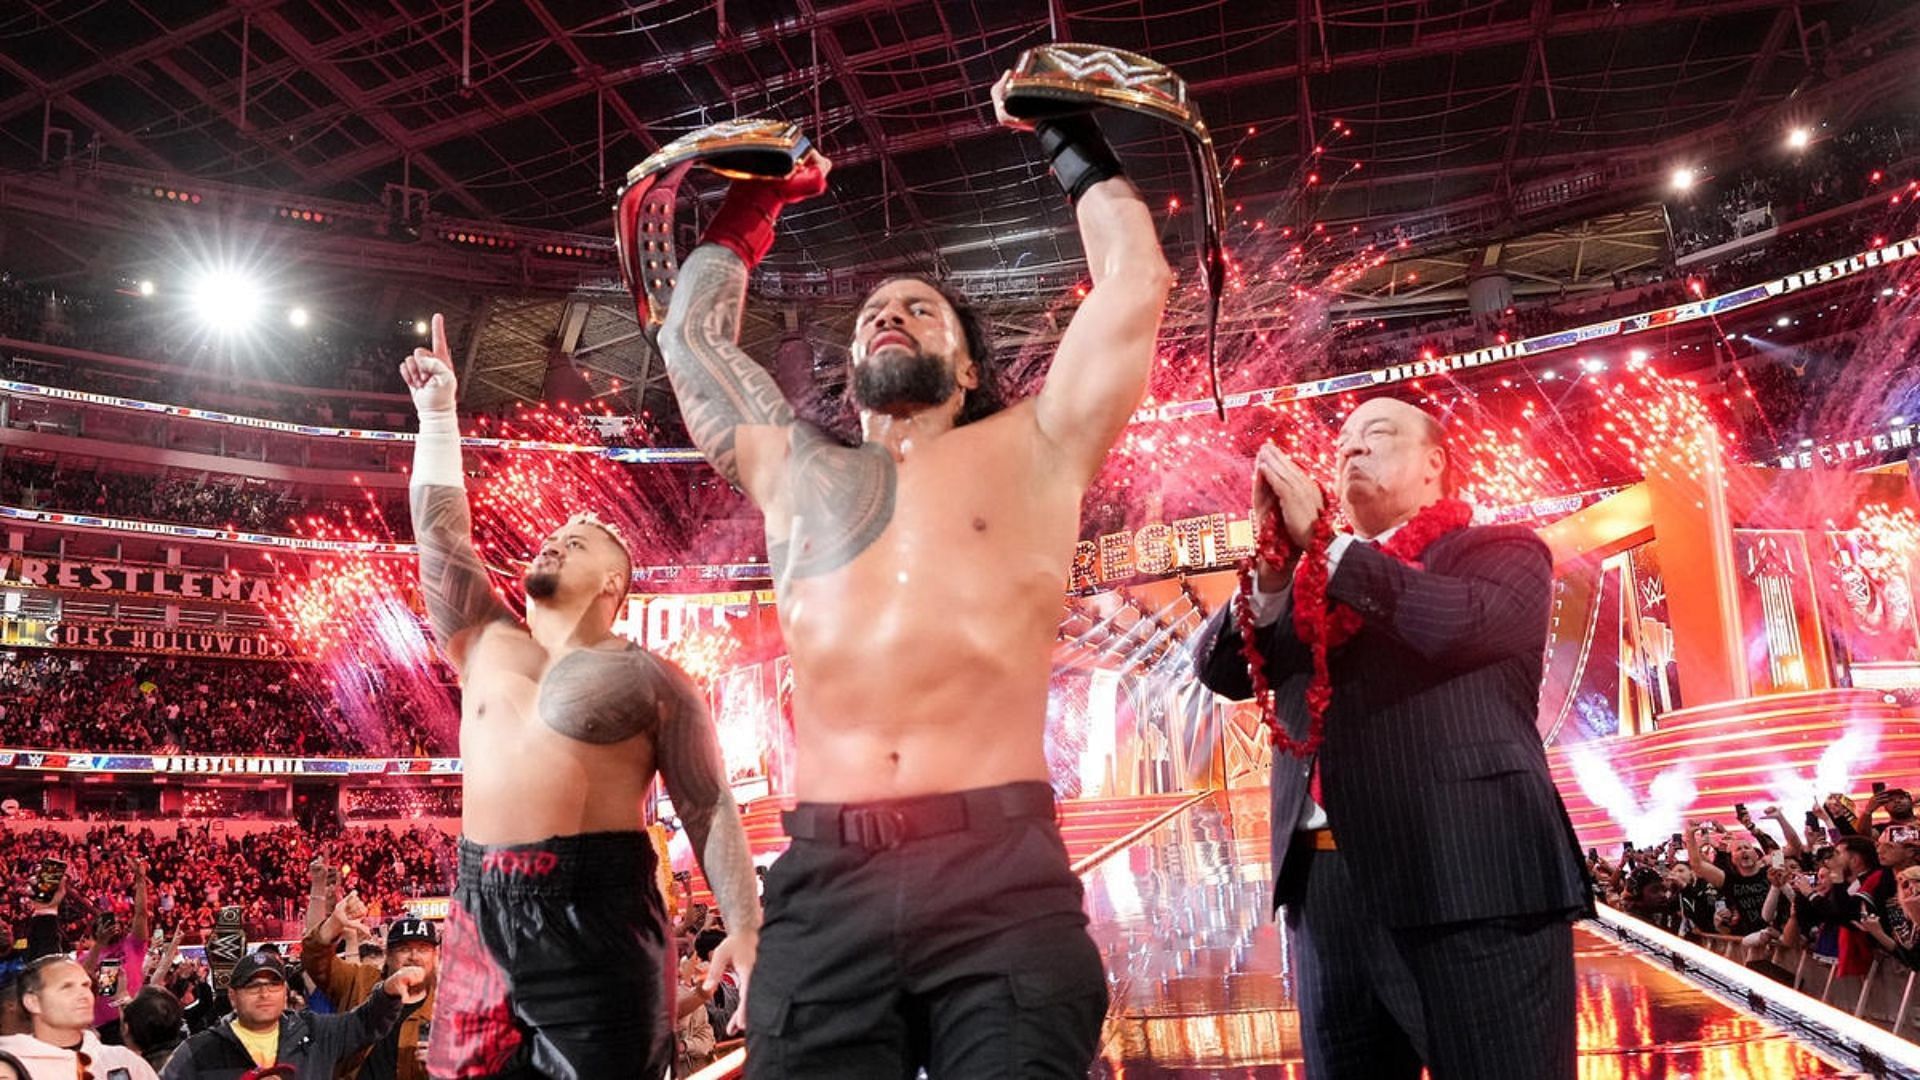 Roman Reigns is the reigning Undisputed WWE Universal Champion